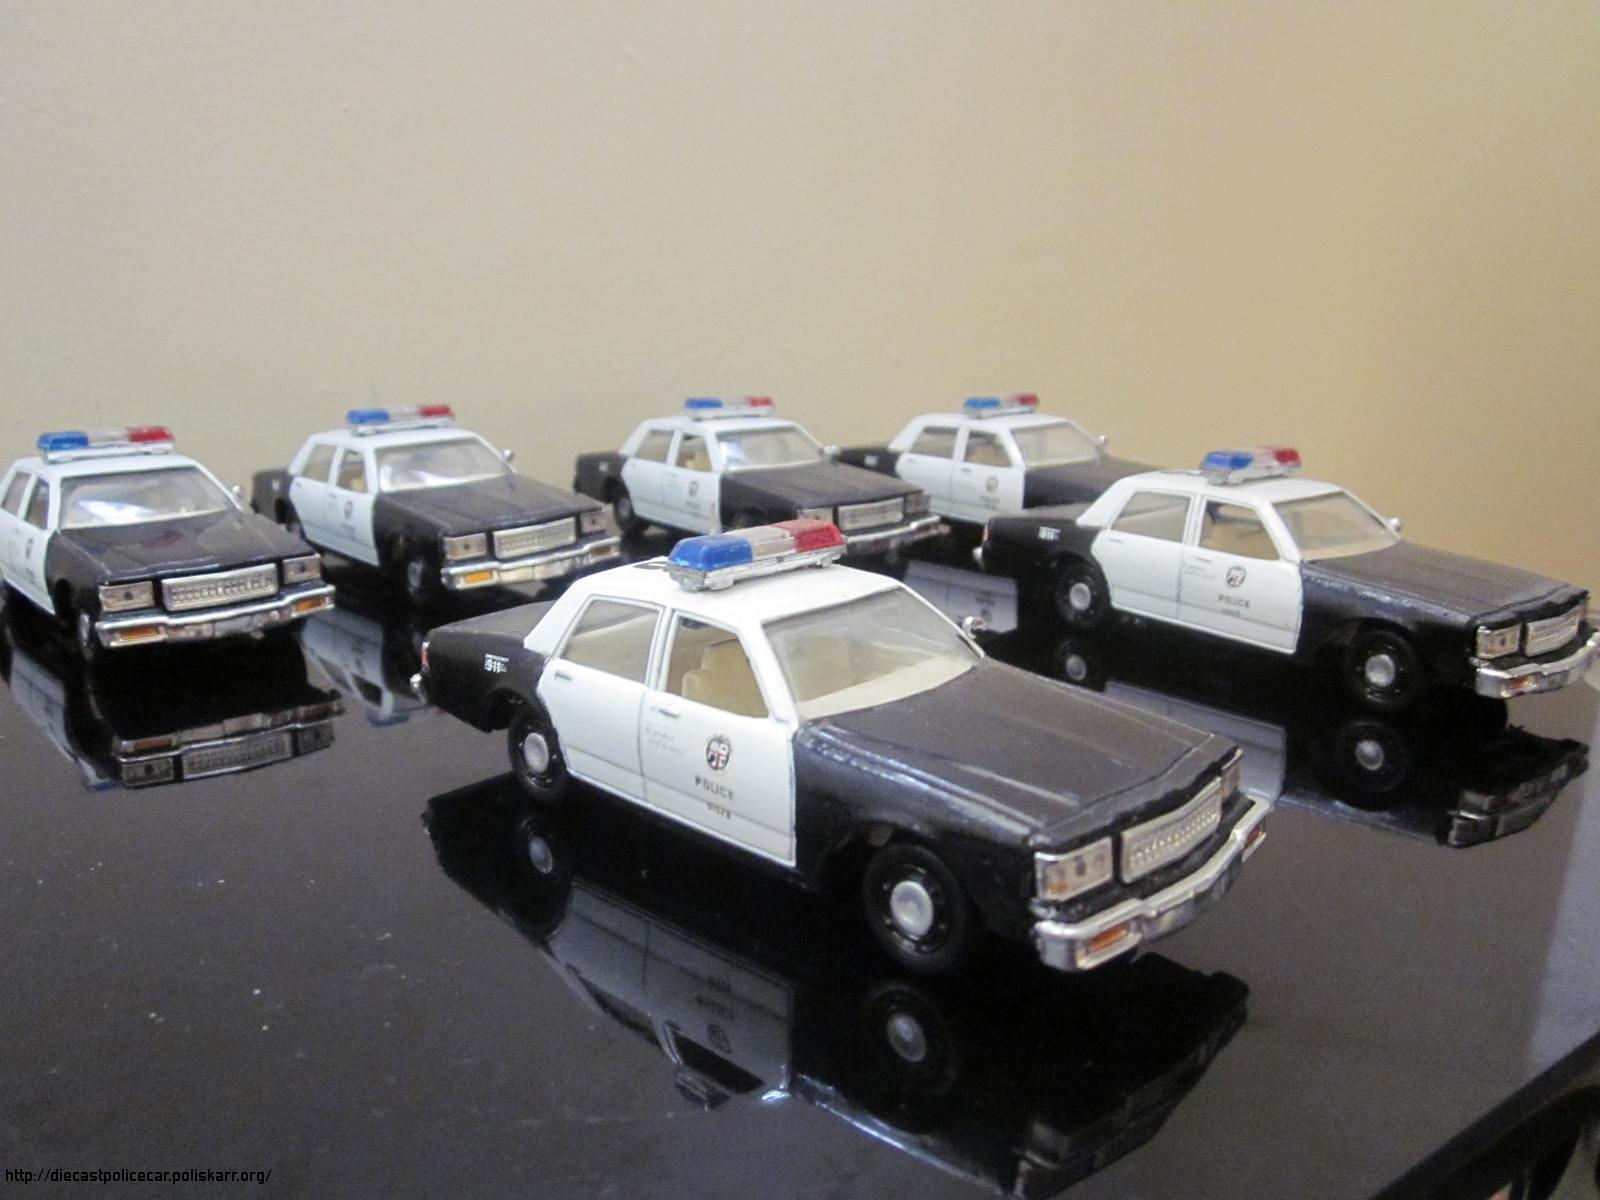 The US and Canadian diecast police car replicas forum